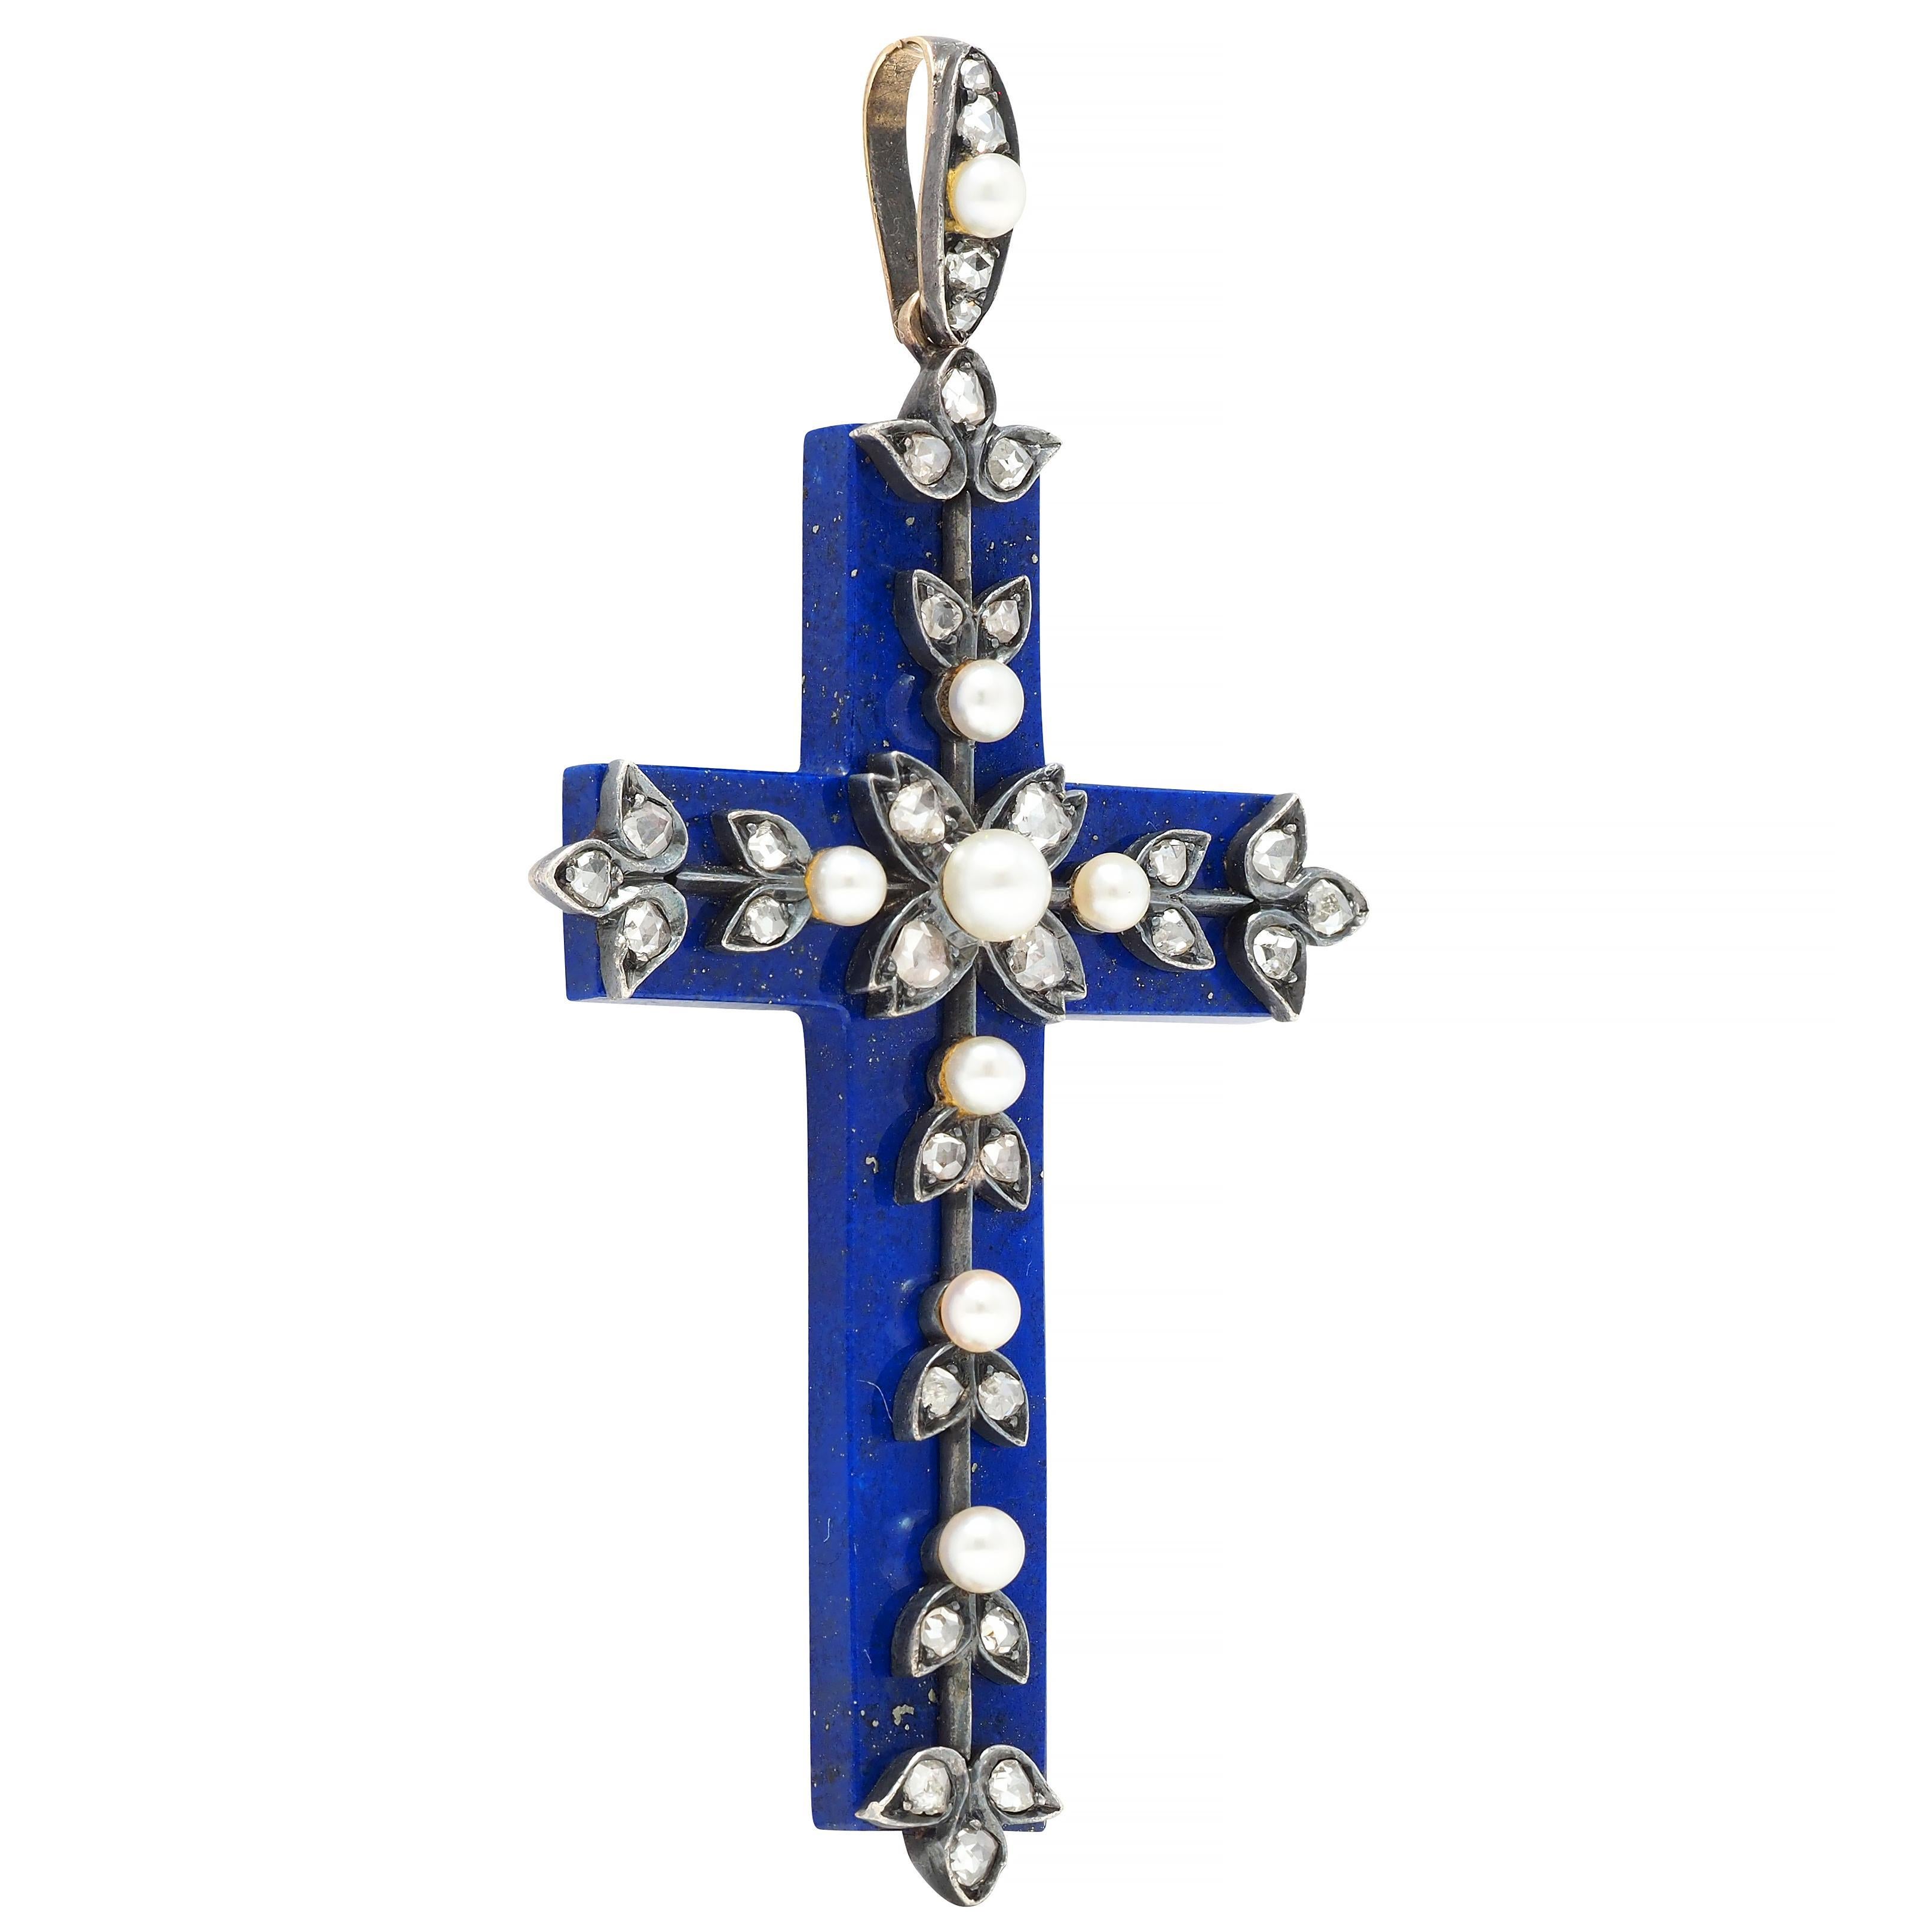 Designed as a marquise shape surmount suspending a cross pendant of carved lapis lazuli 
Opaque ultramarine blue with gold pyrite flecking and decorated with vine motif appliqué 
Silver-topped and bead set with approximately 1.48 carats of rose cut